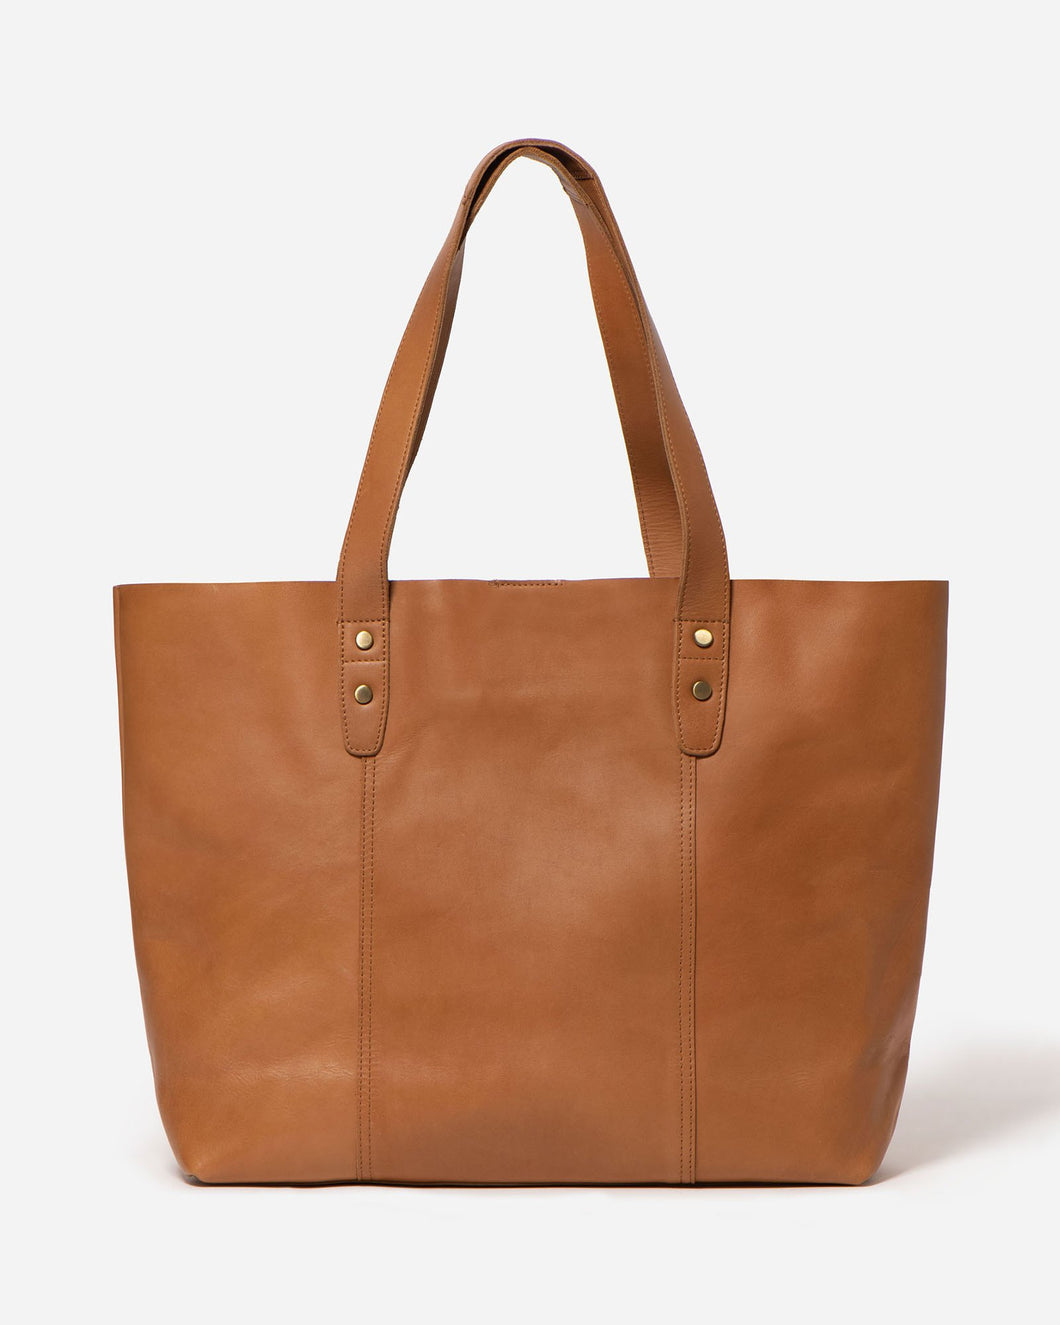 Stitch and Hide - Emma Leather Tote